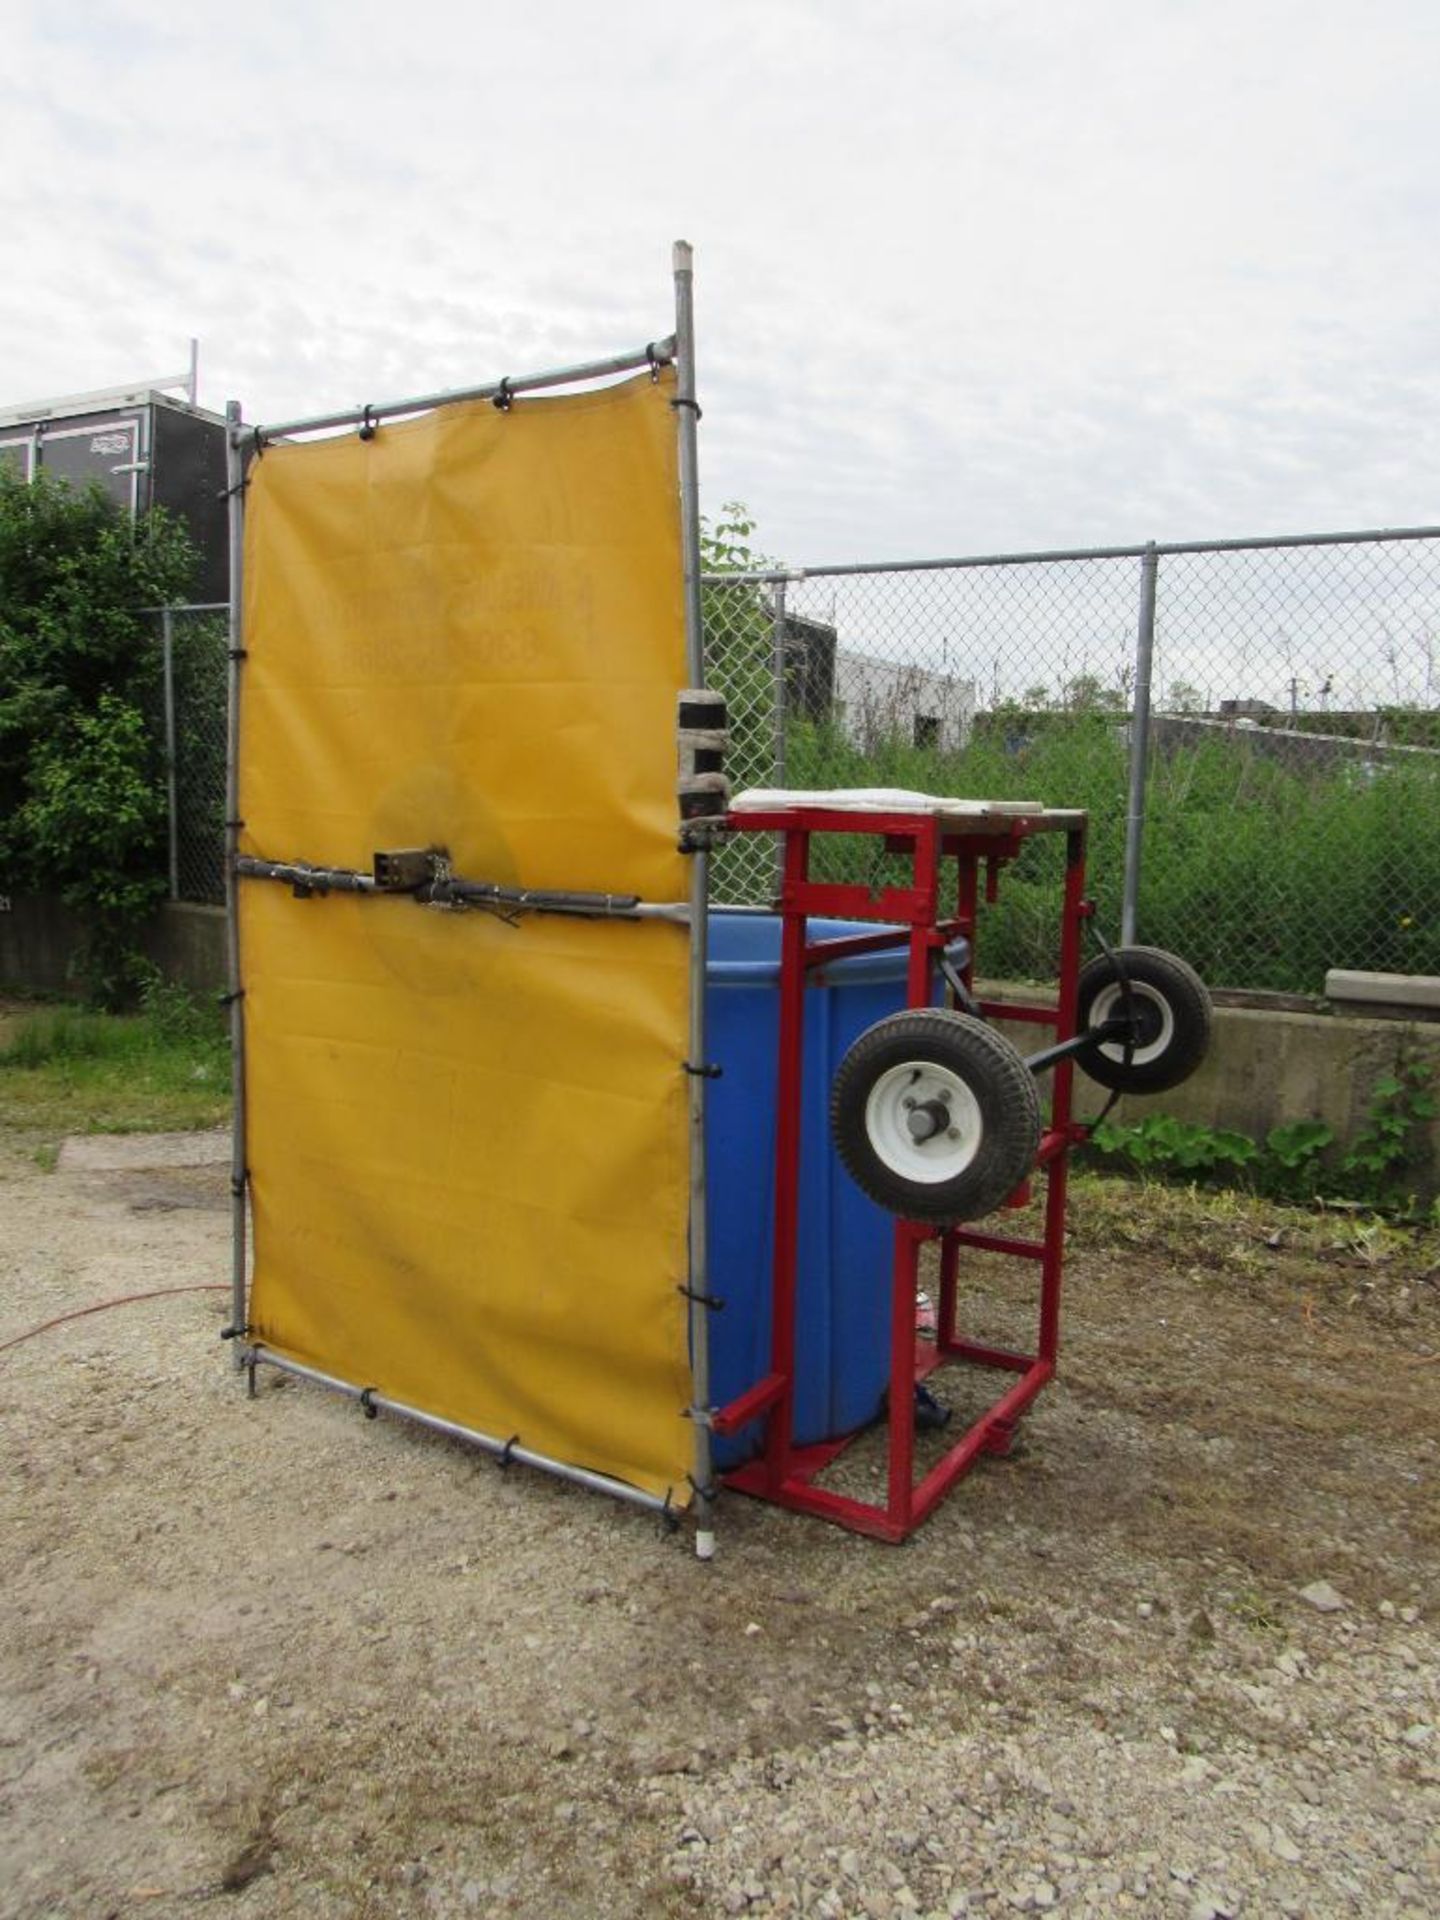 Dunk Tank Trailer mounted - includes bucket of balls, target and activation arm. See Lot 24A Misc. D - Image 3 of 6